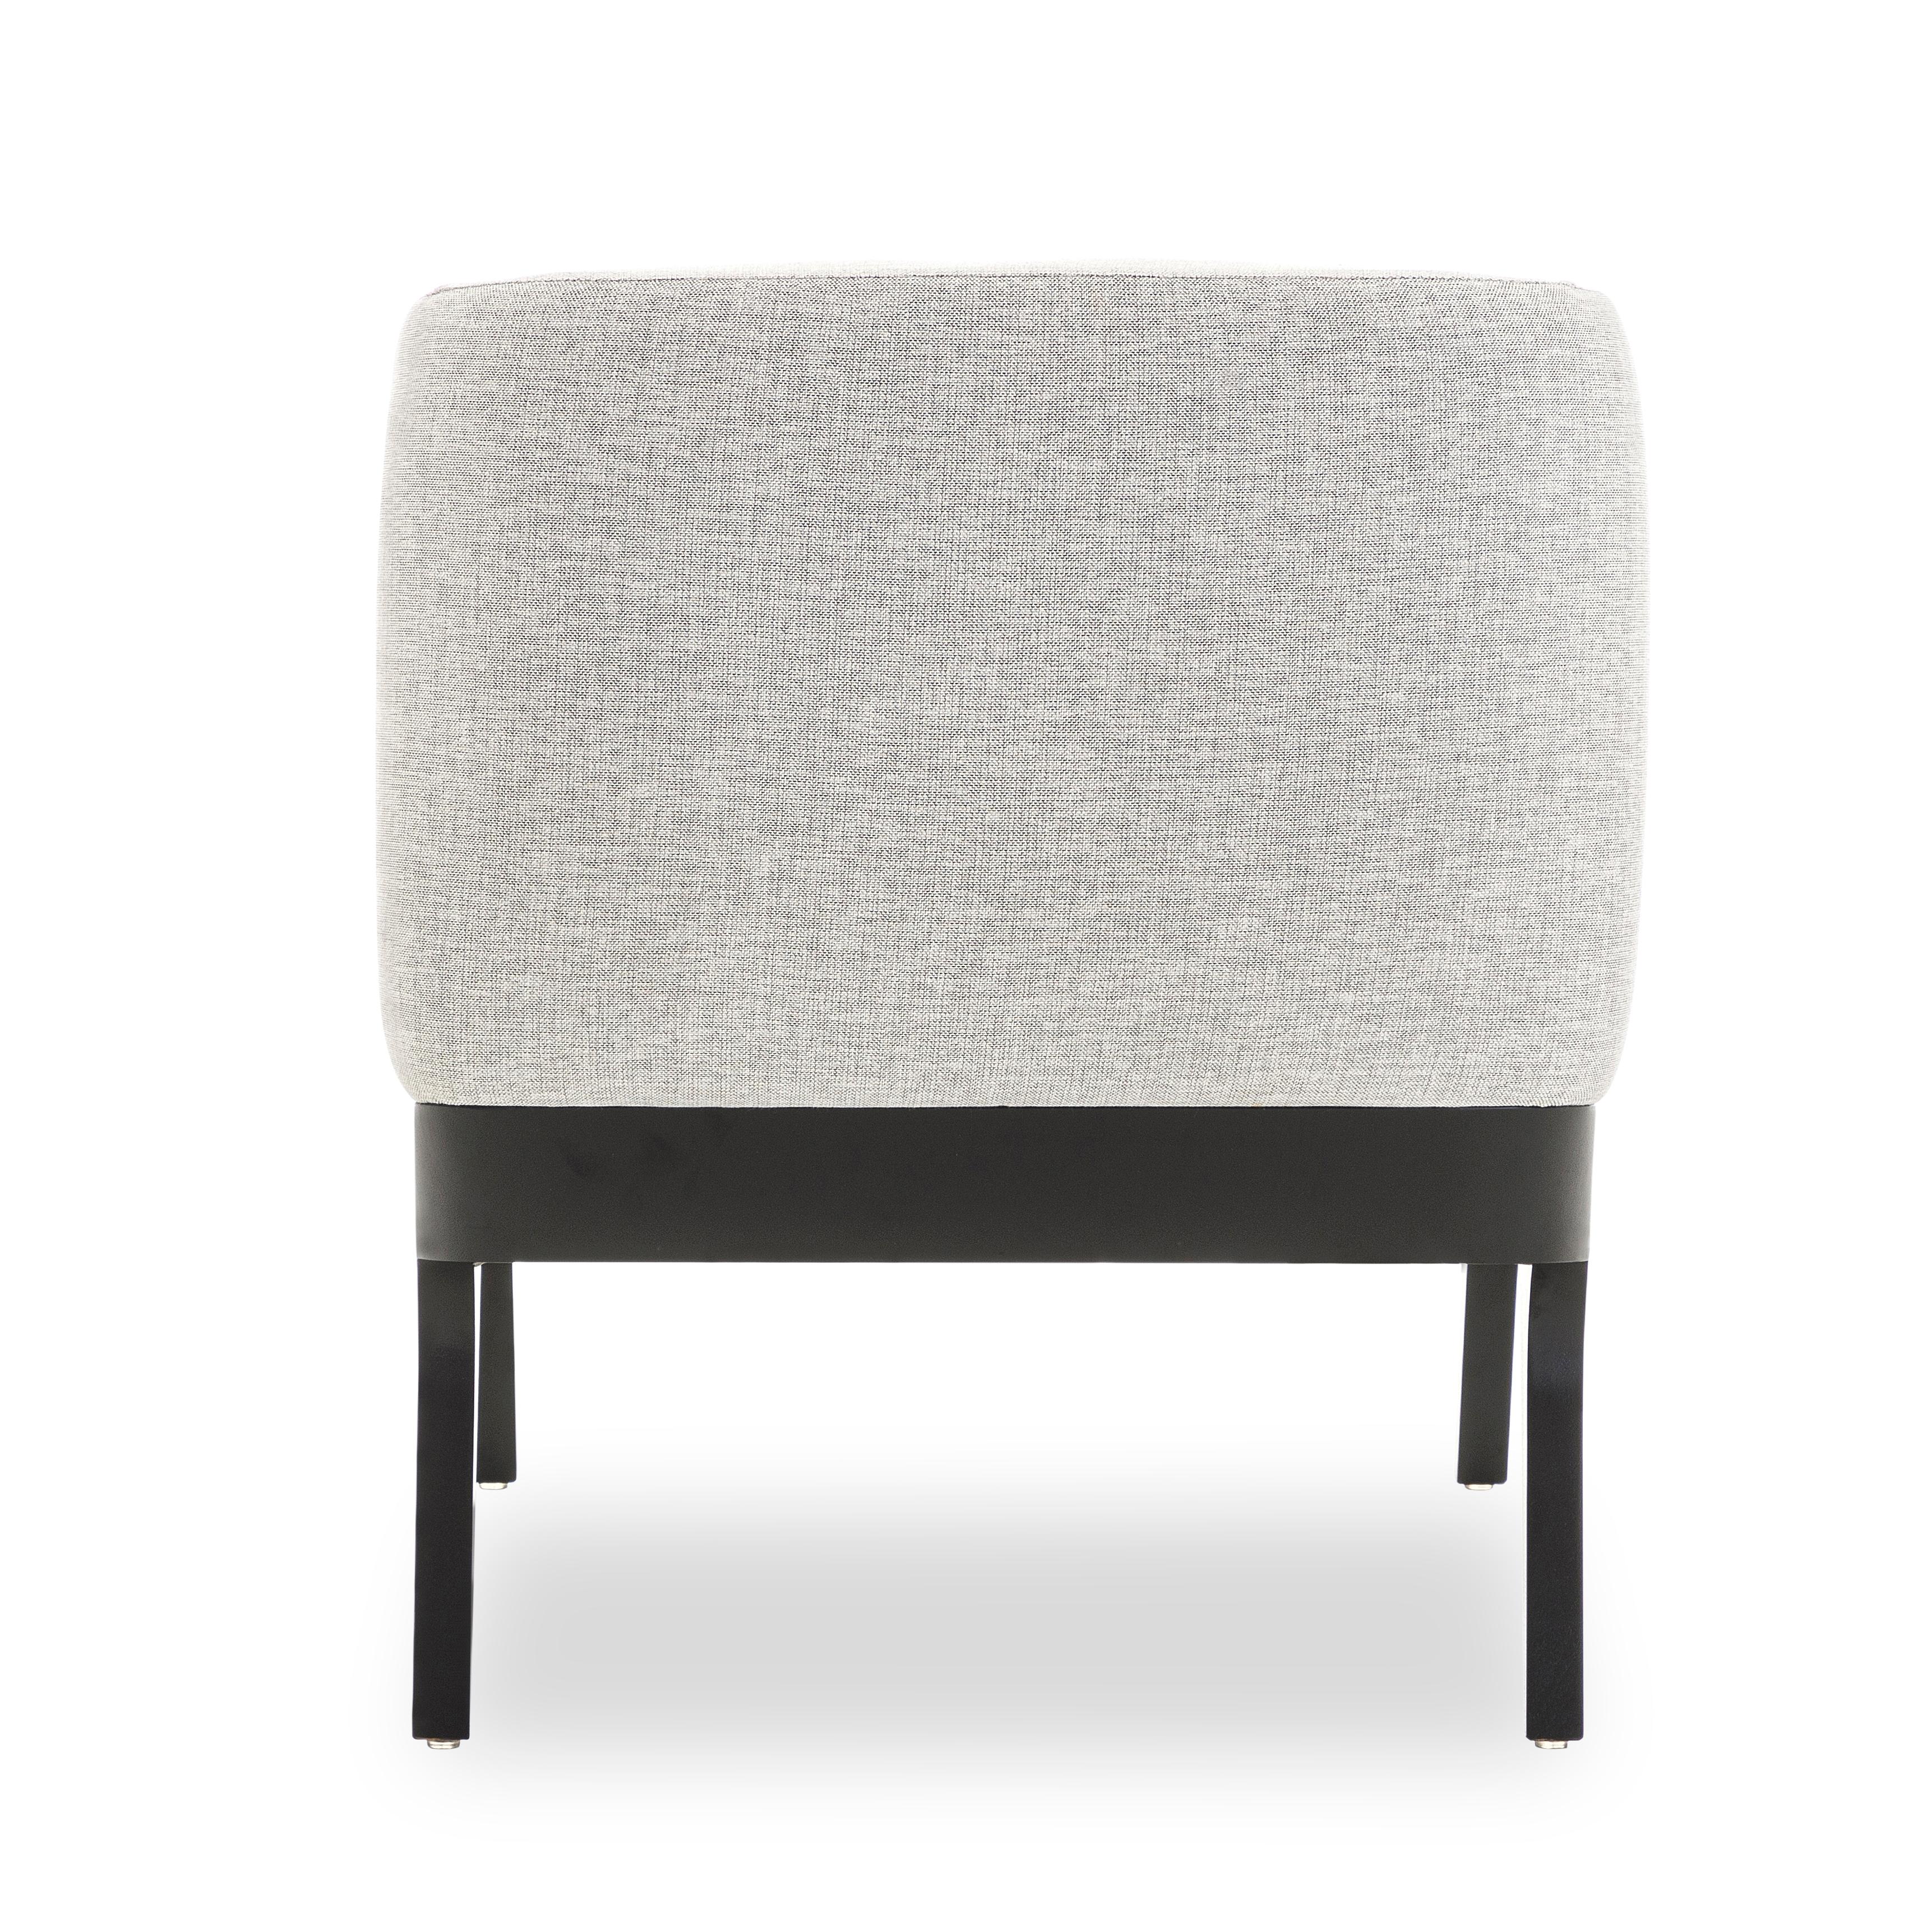 The Abra armchair is a welcoming addition to any room in your decor, with black and white fabric upholstery and a black wood frame. This armchair has been created by our amazing team of architectors and designers from Uultis in order to bring